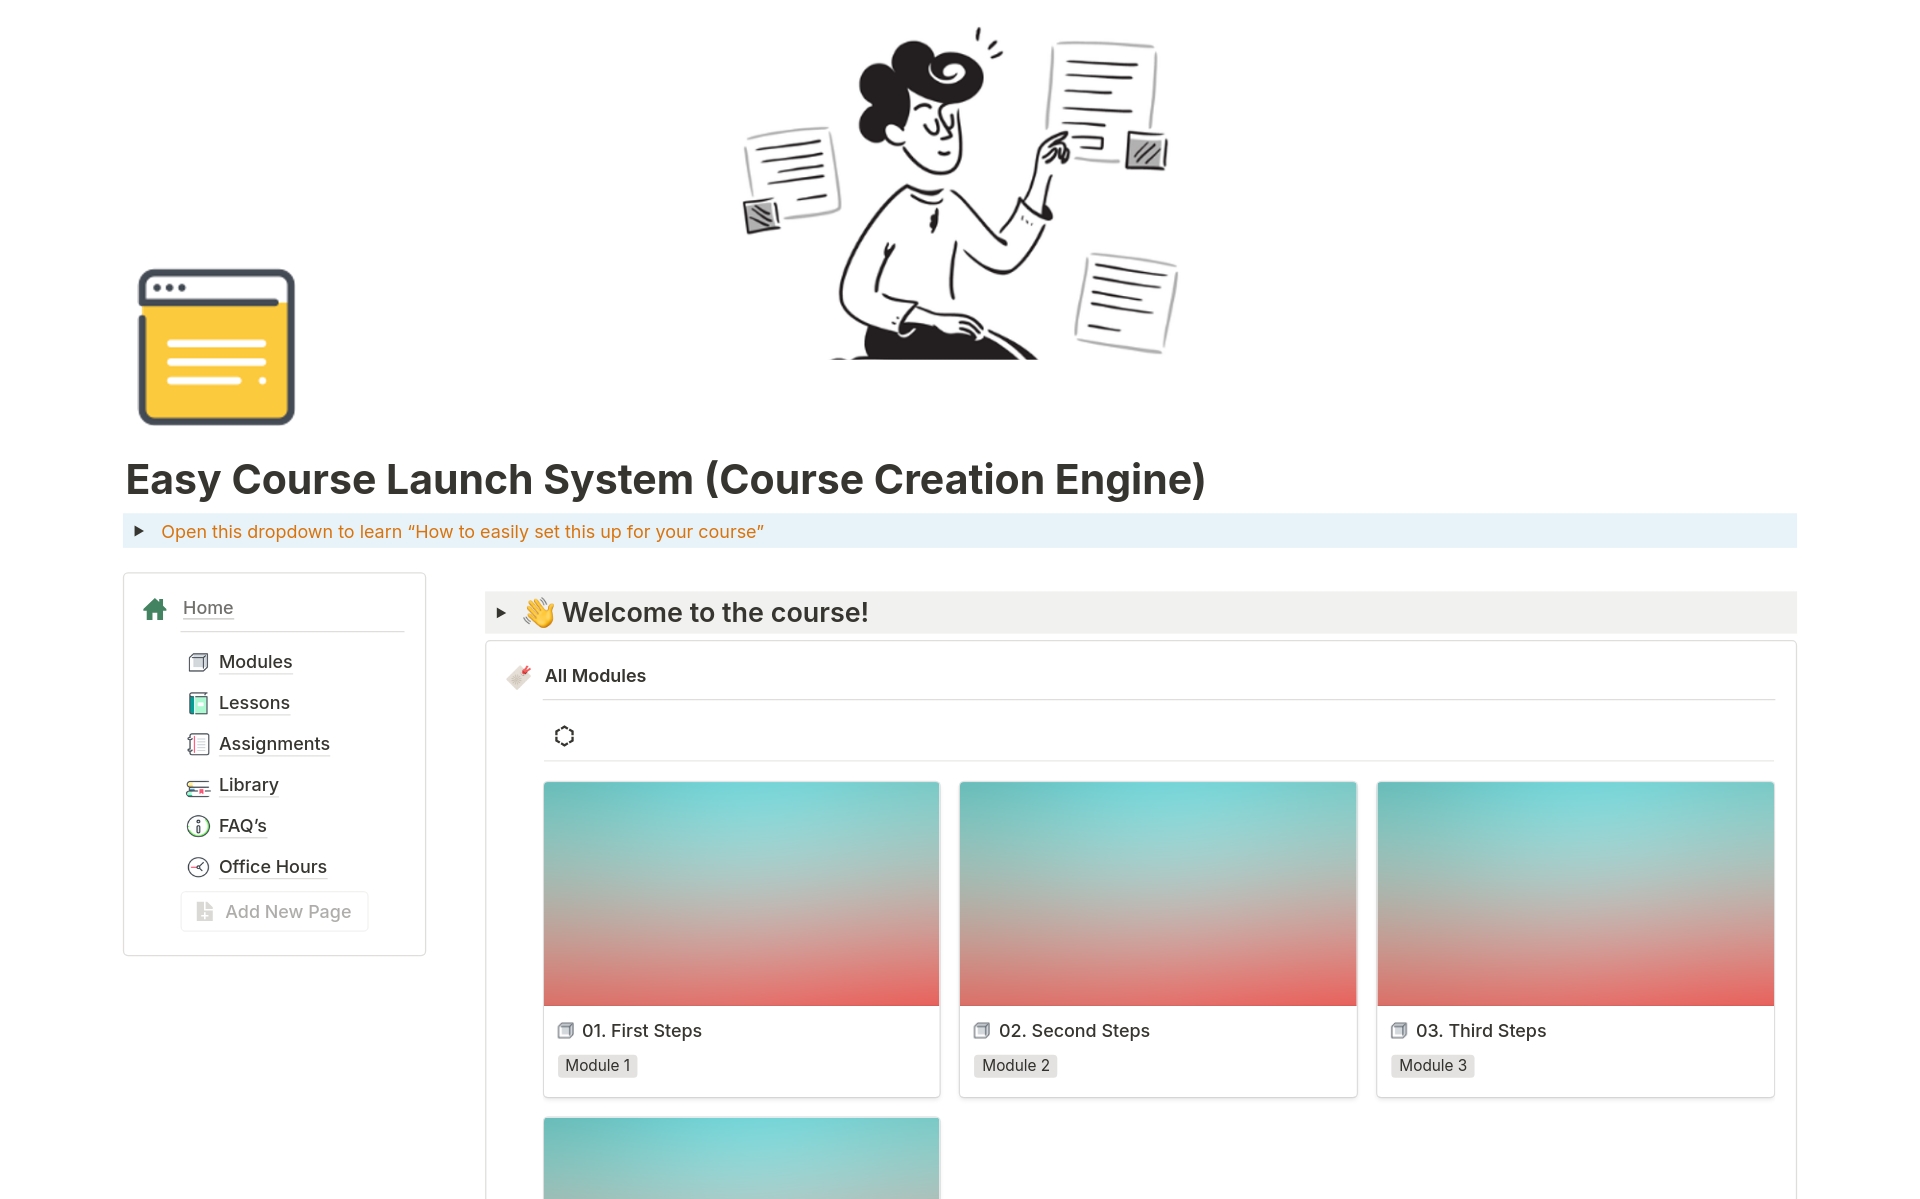 Revolutionize your course creation process with our Easy Course Launch System. Our intuitive template, built on Notion, streamlines every step of course development, from ideation to delivery